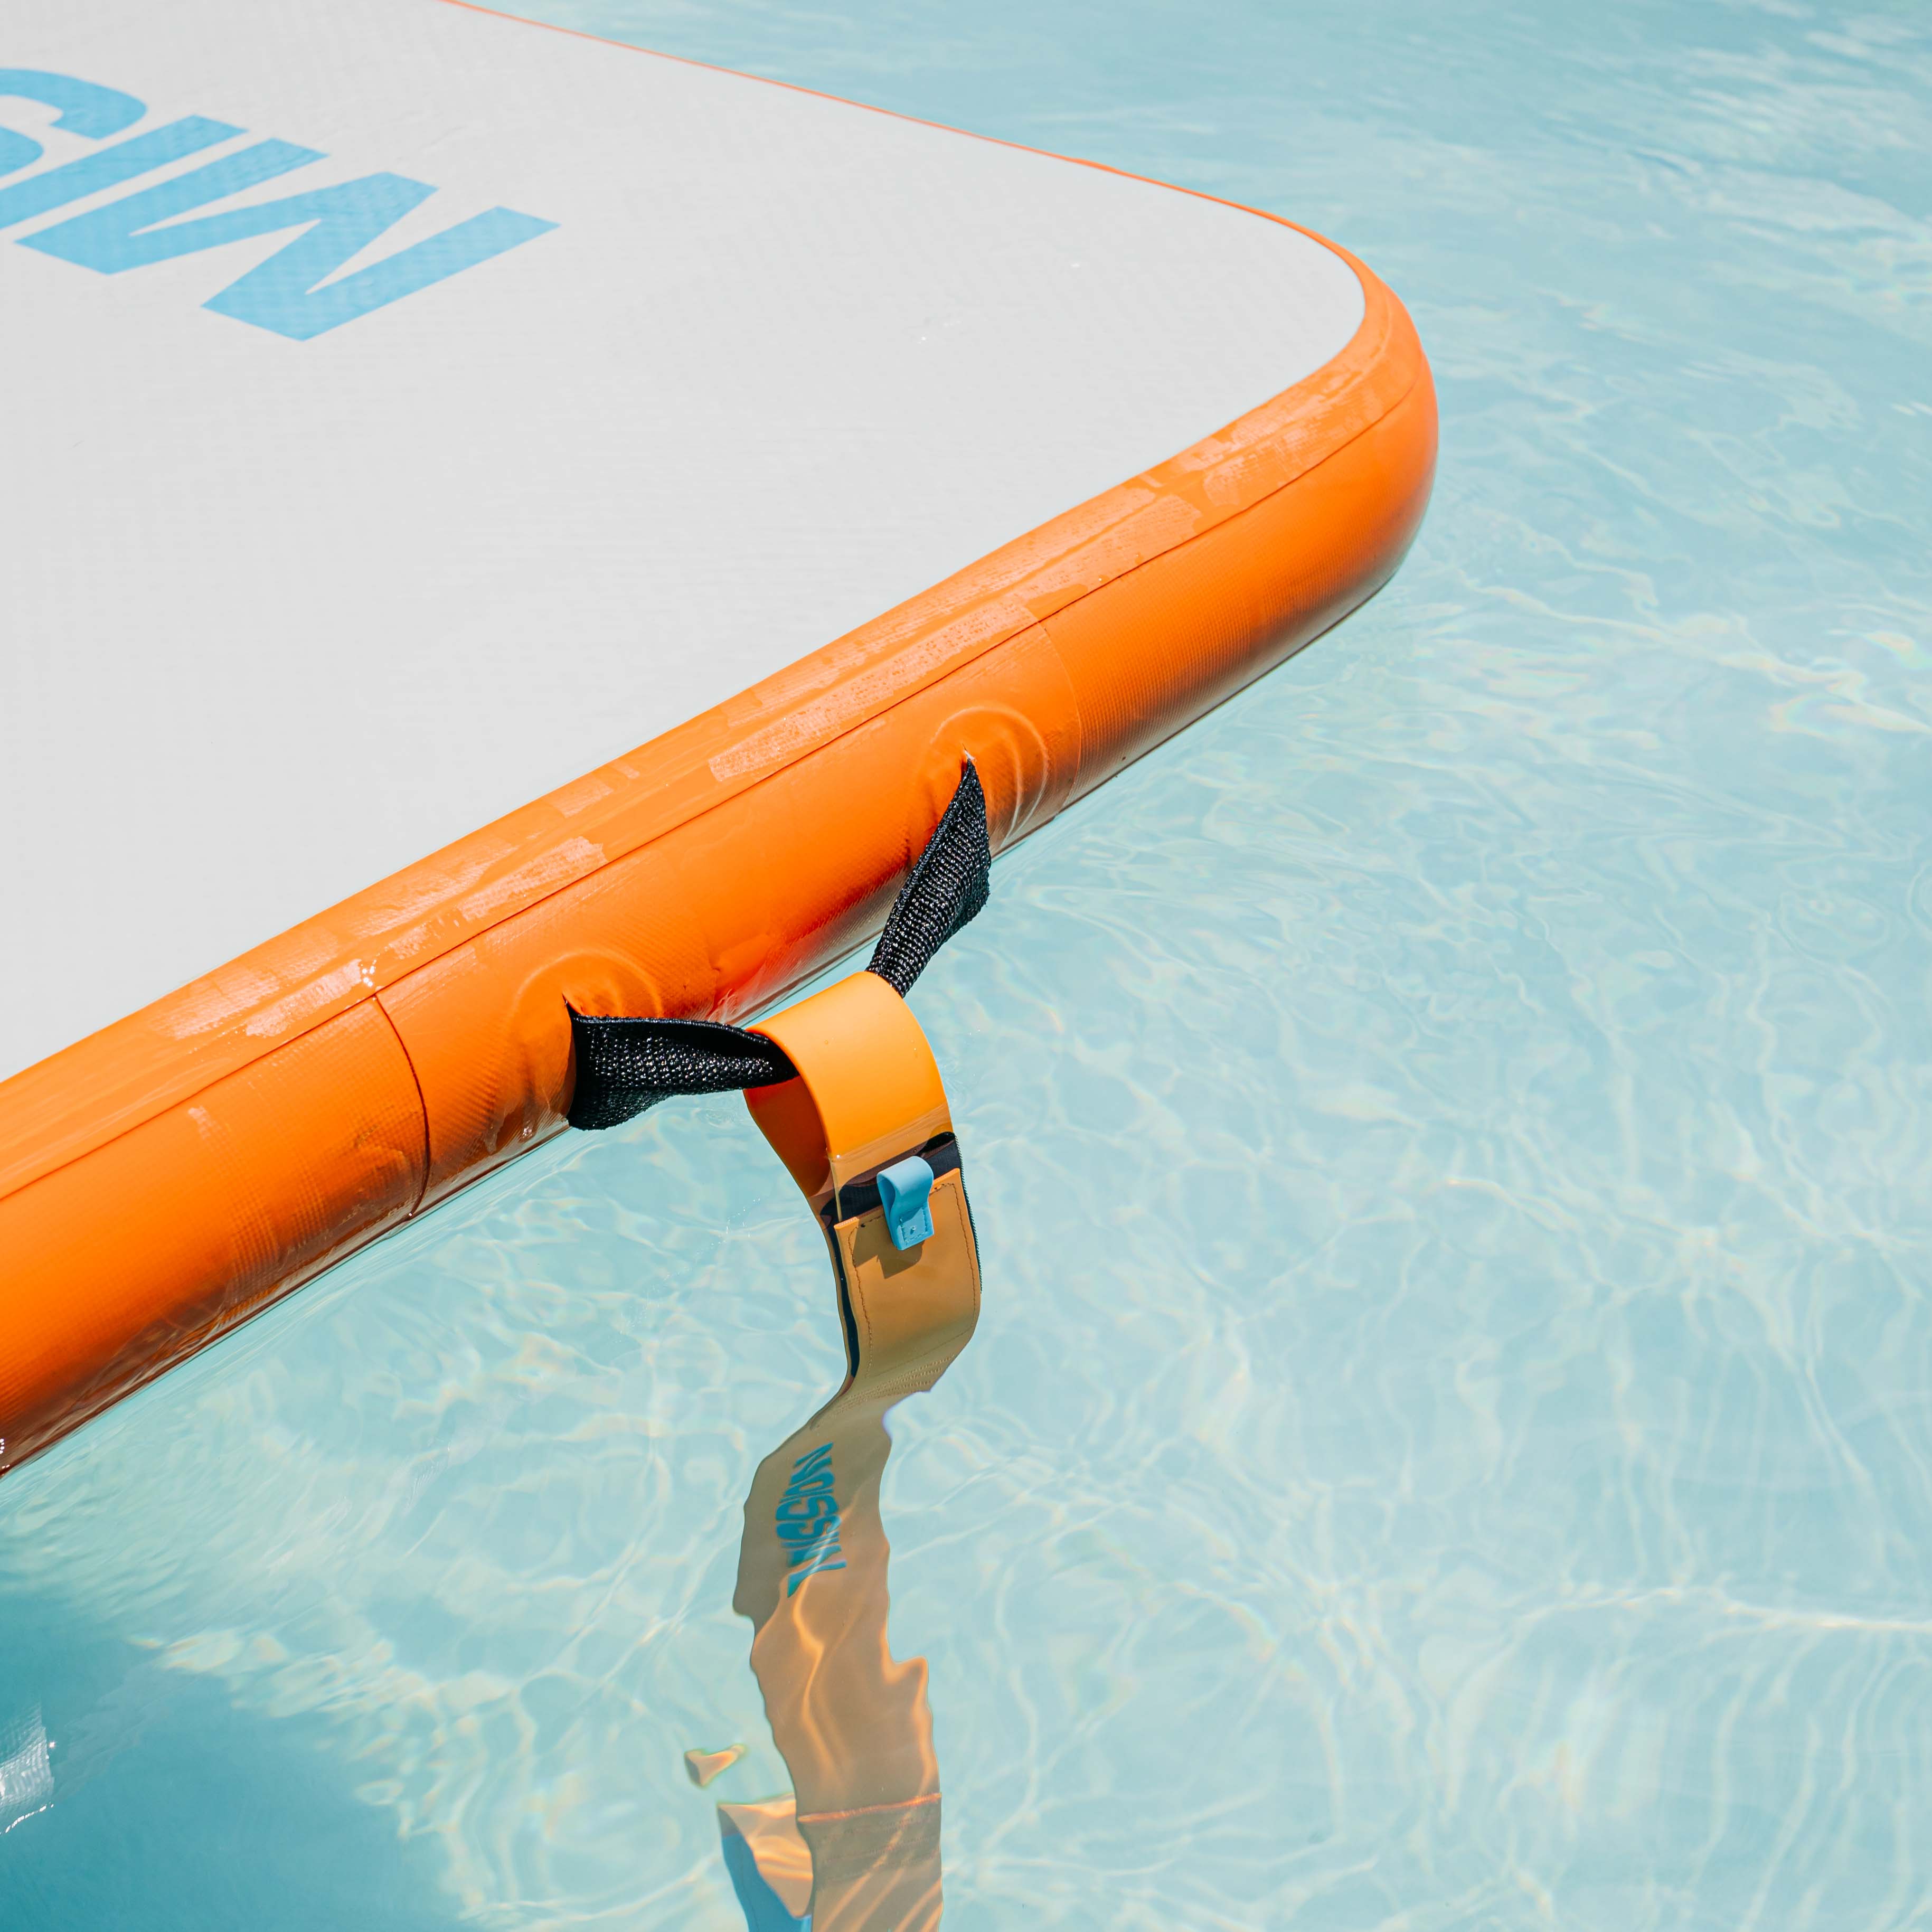 REEF Stirrup Step | Step Accessory for Inflatables